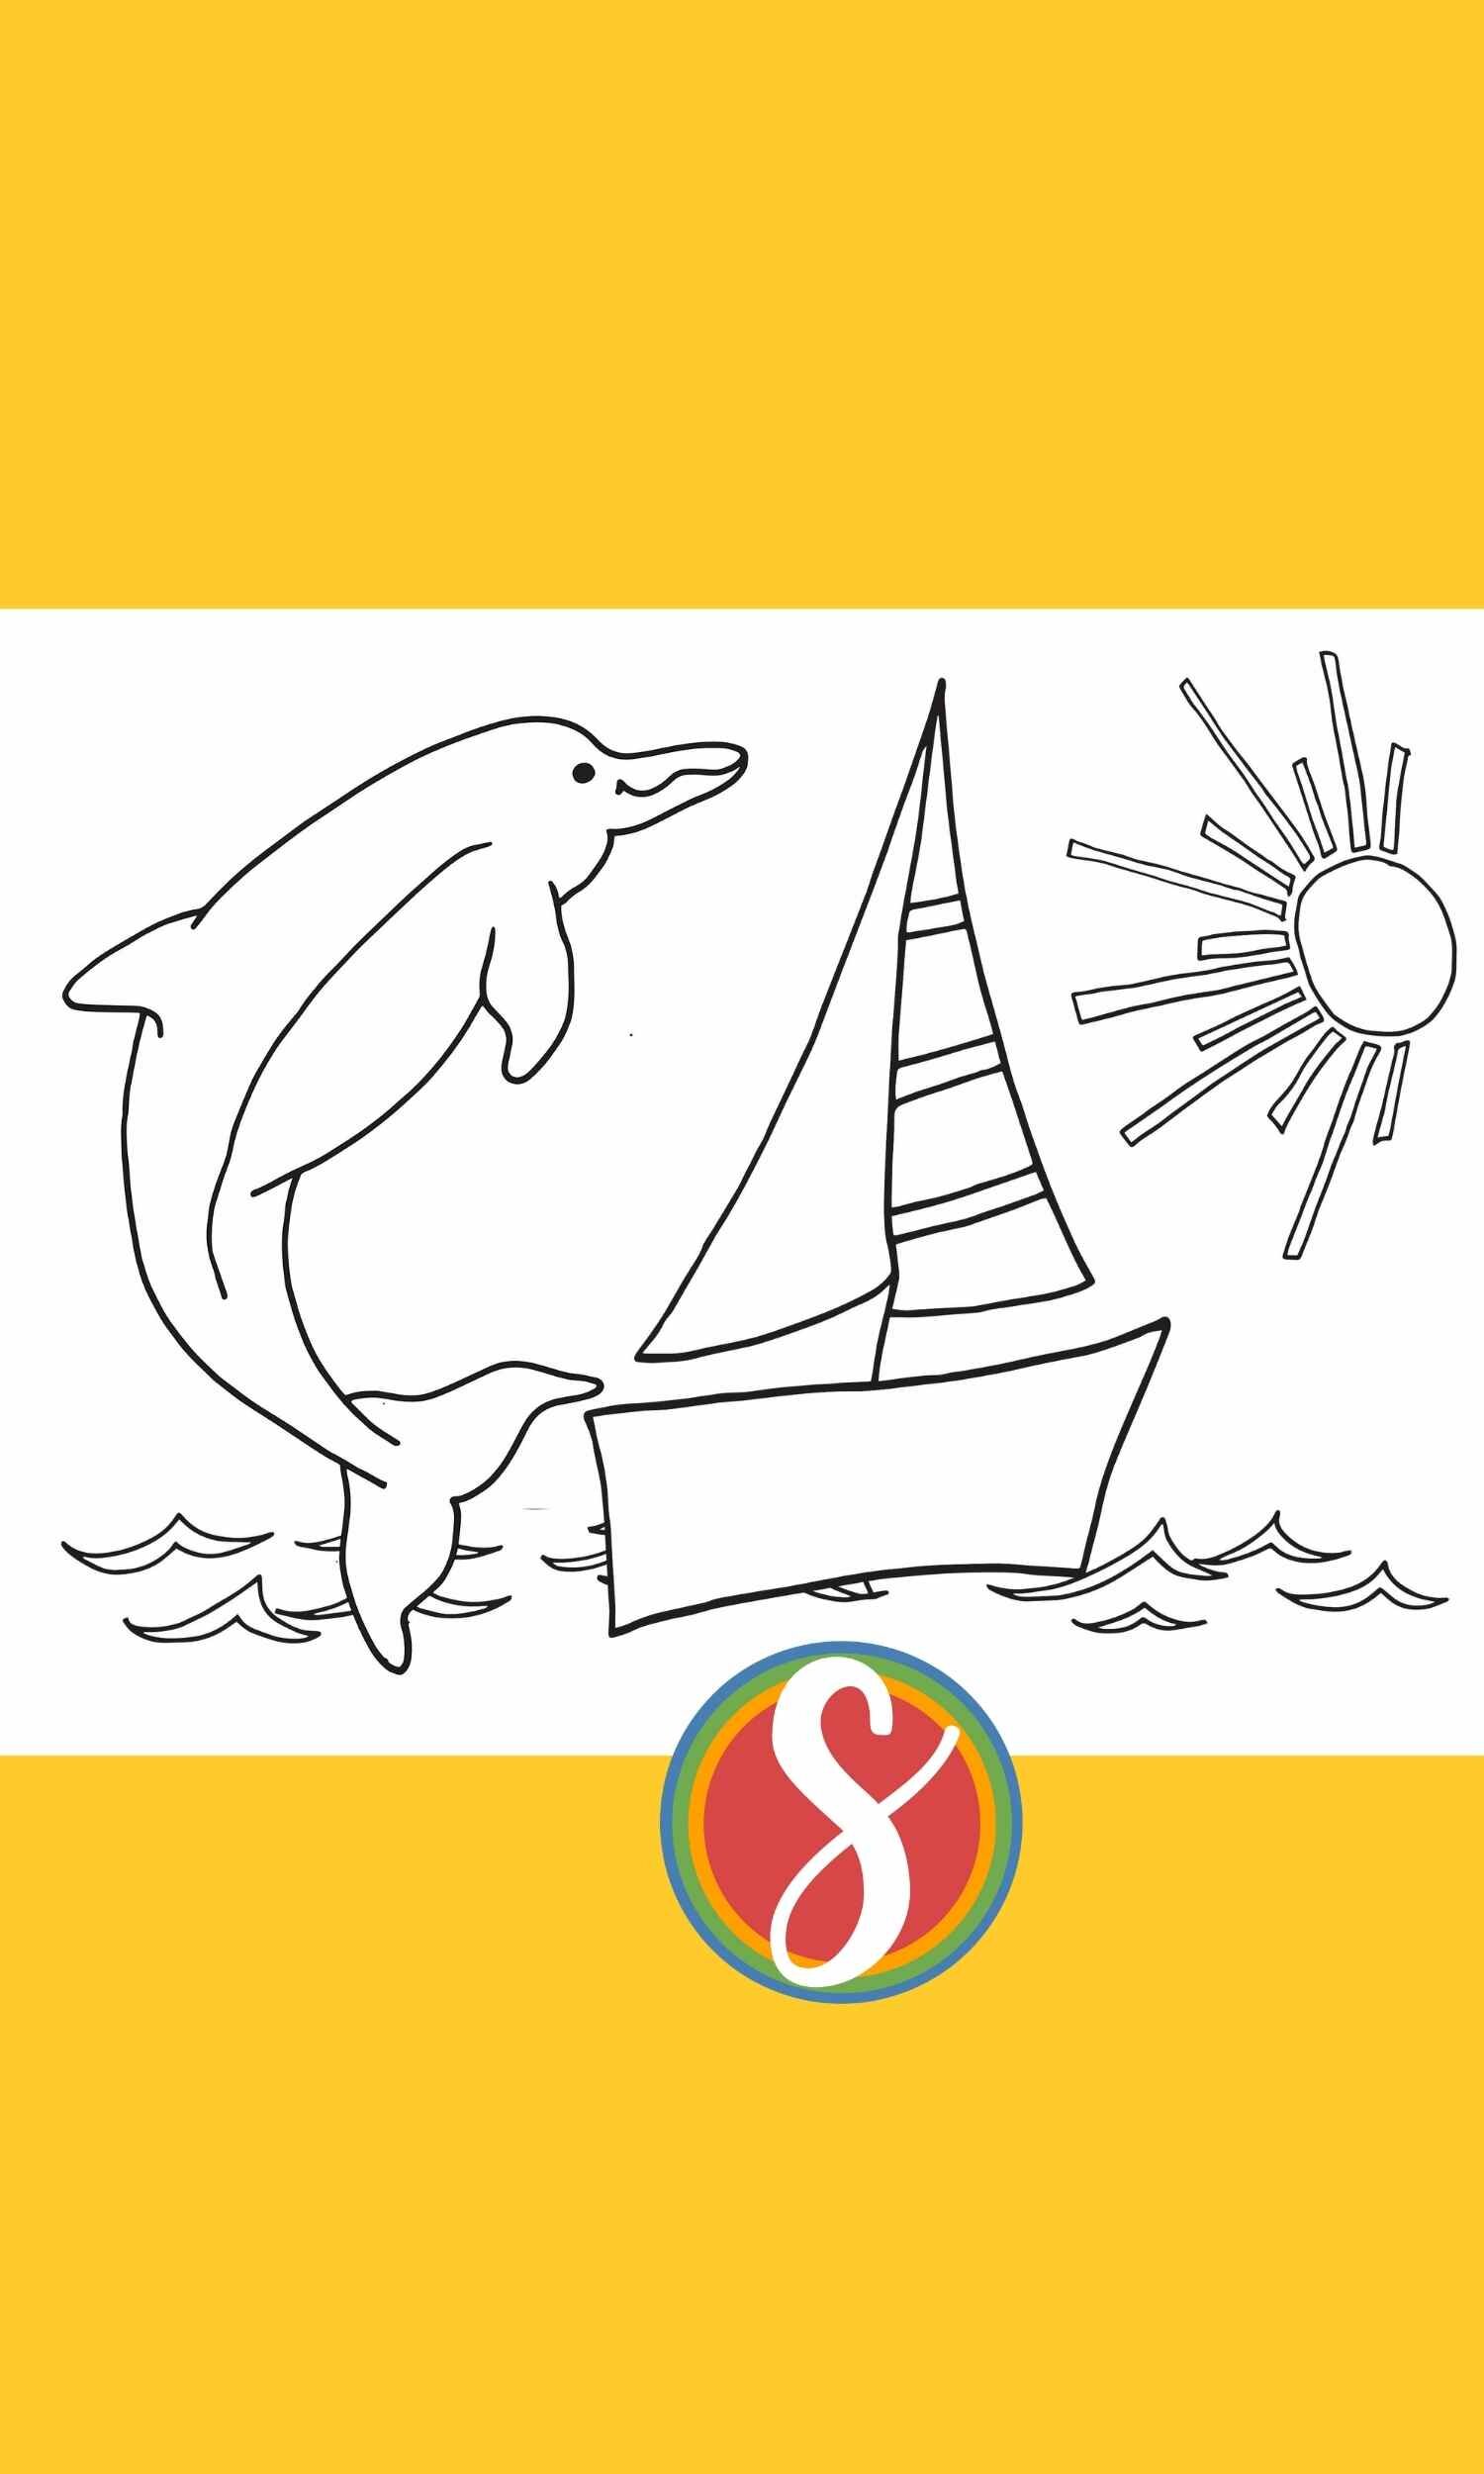 Free dolphin coloring page with a boat from Stevie Doodles - 11 free dolphin coloring pages in this post